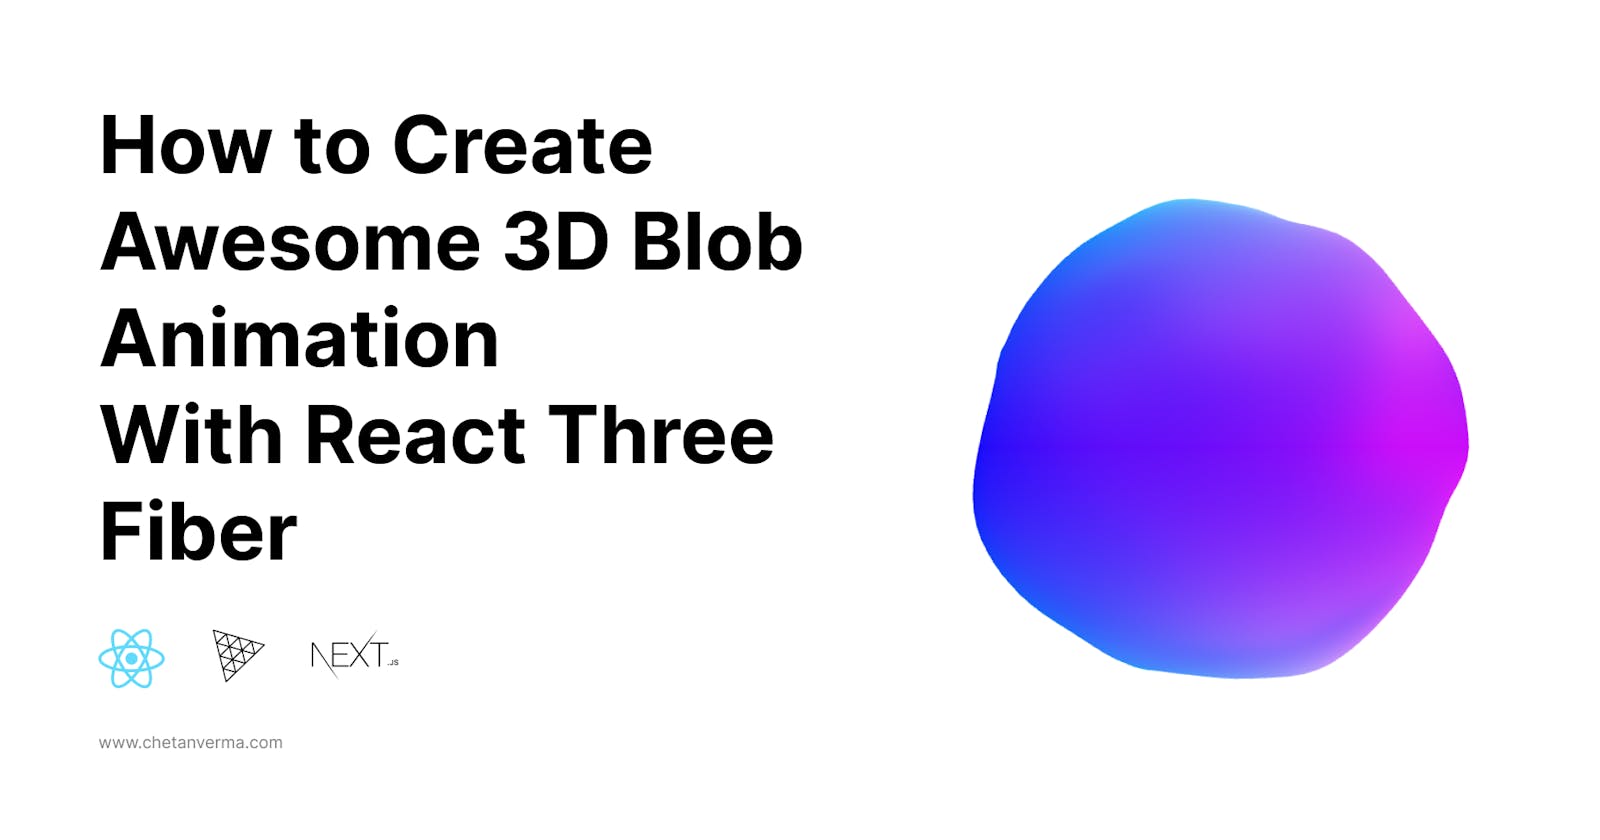 How To Create an Awesome Blob With React Three Fiber